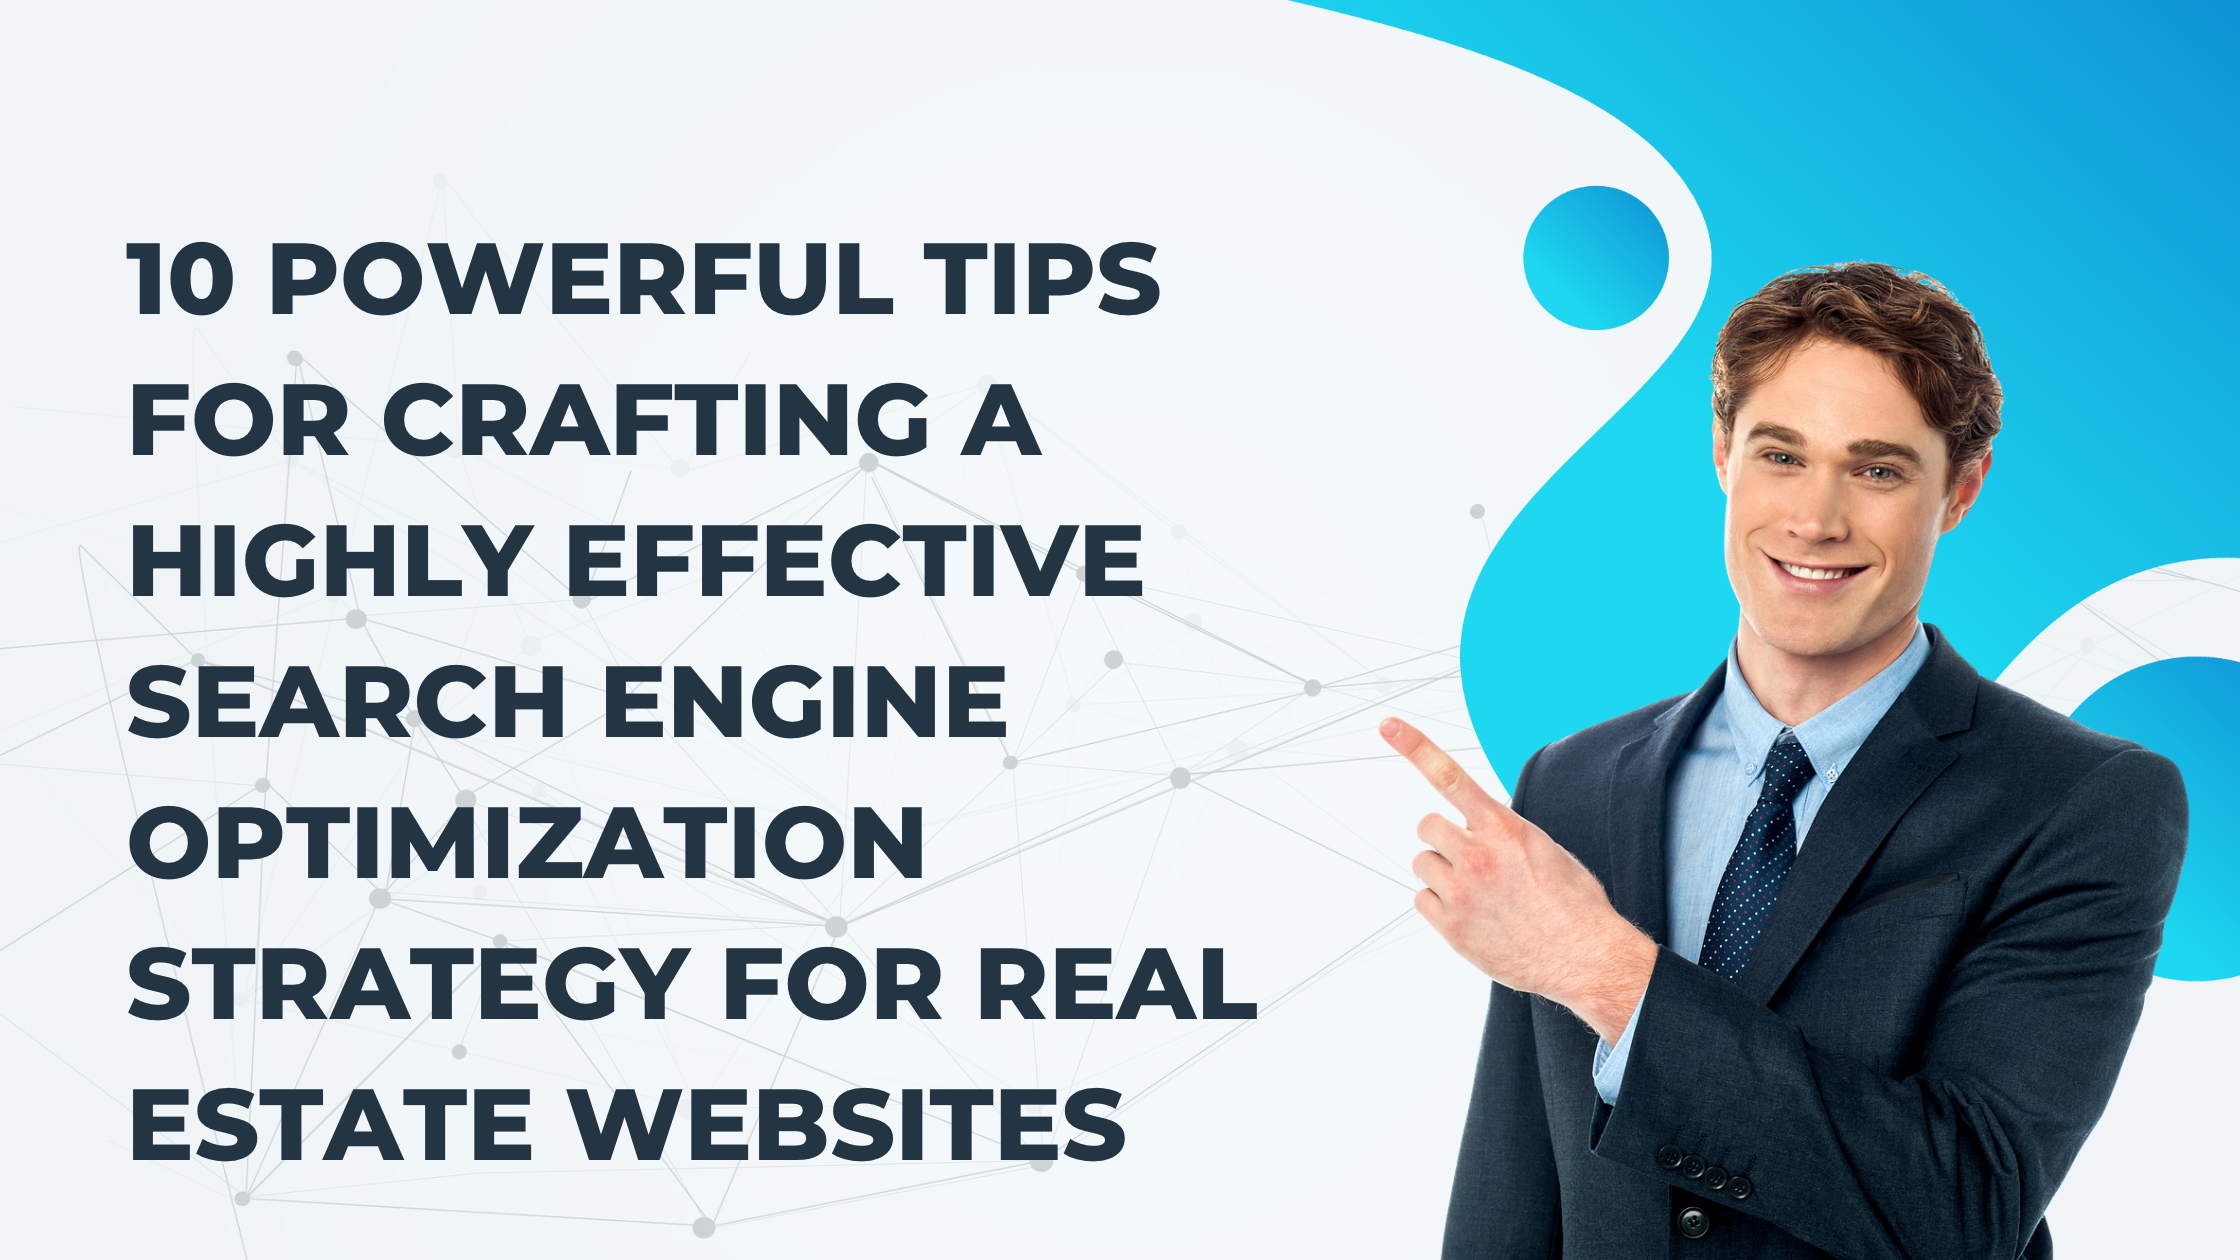 SEO Strategy for Real Estate Websites : 10 Powerful & Effective Tips